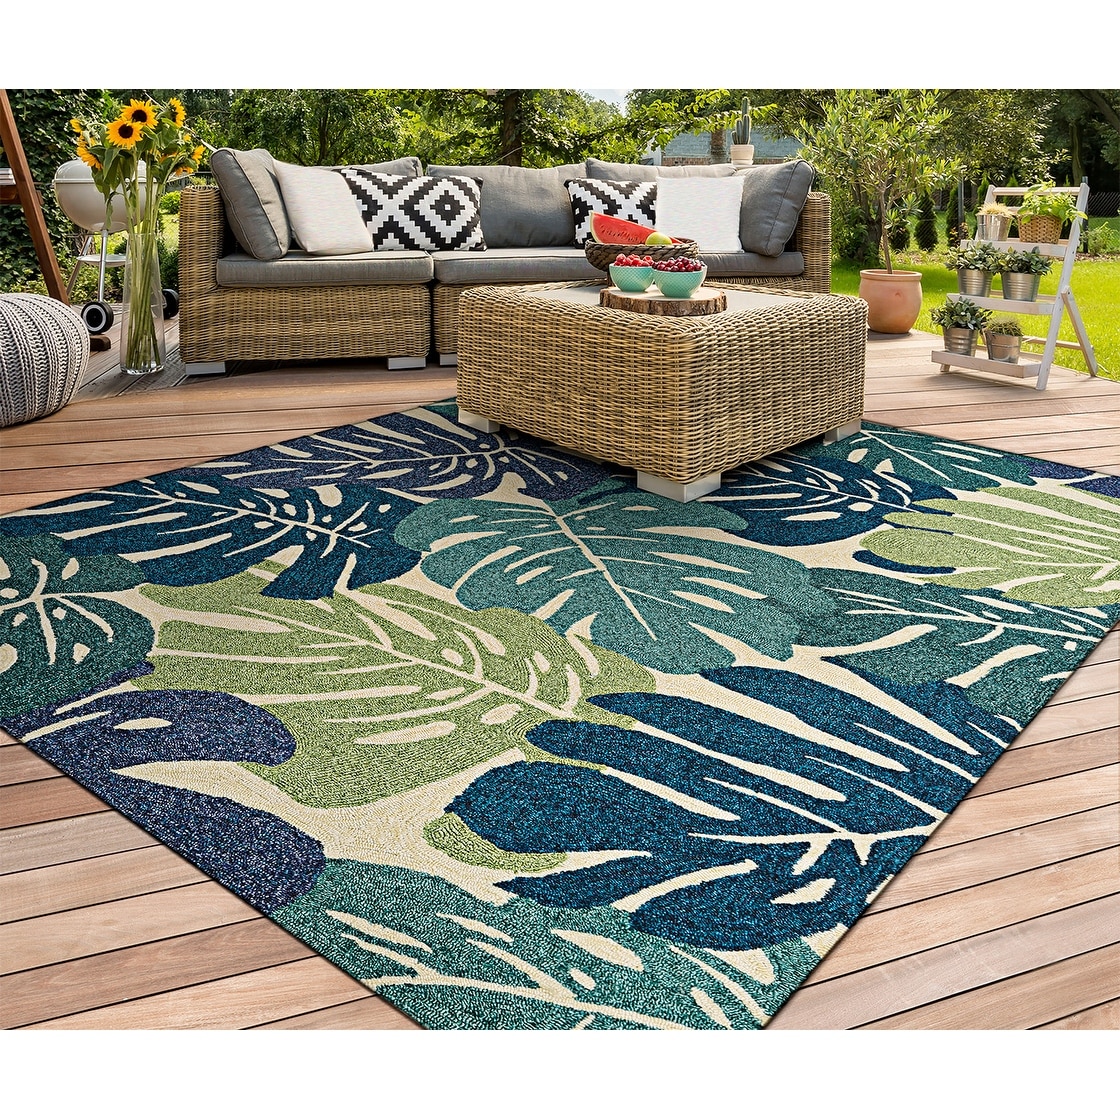 https://ak1.ostkcdn.com/images/products/is/images/direct/9c713de21d8ff02ea204510bbeb1545a6bb9eed2/Miami-Arum-Teal-Navy-Indoor--Outdoor-Area-Rug.jpg